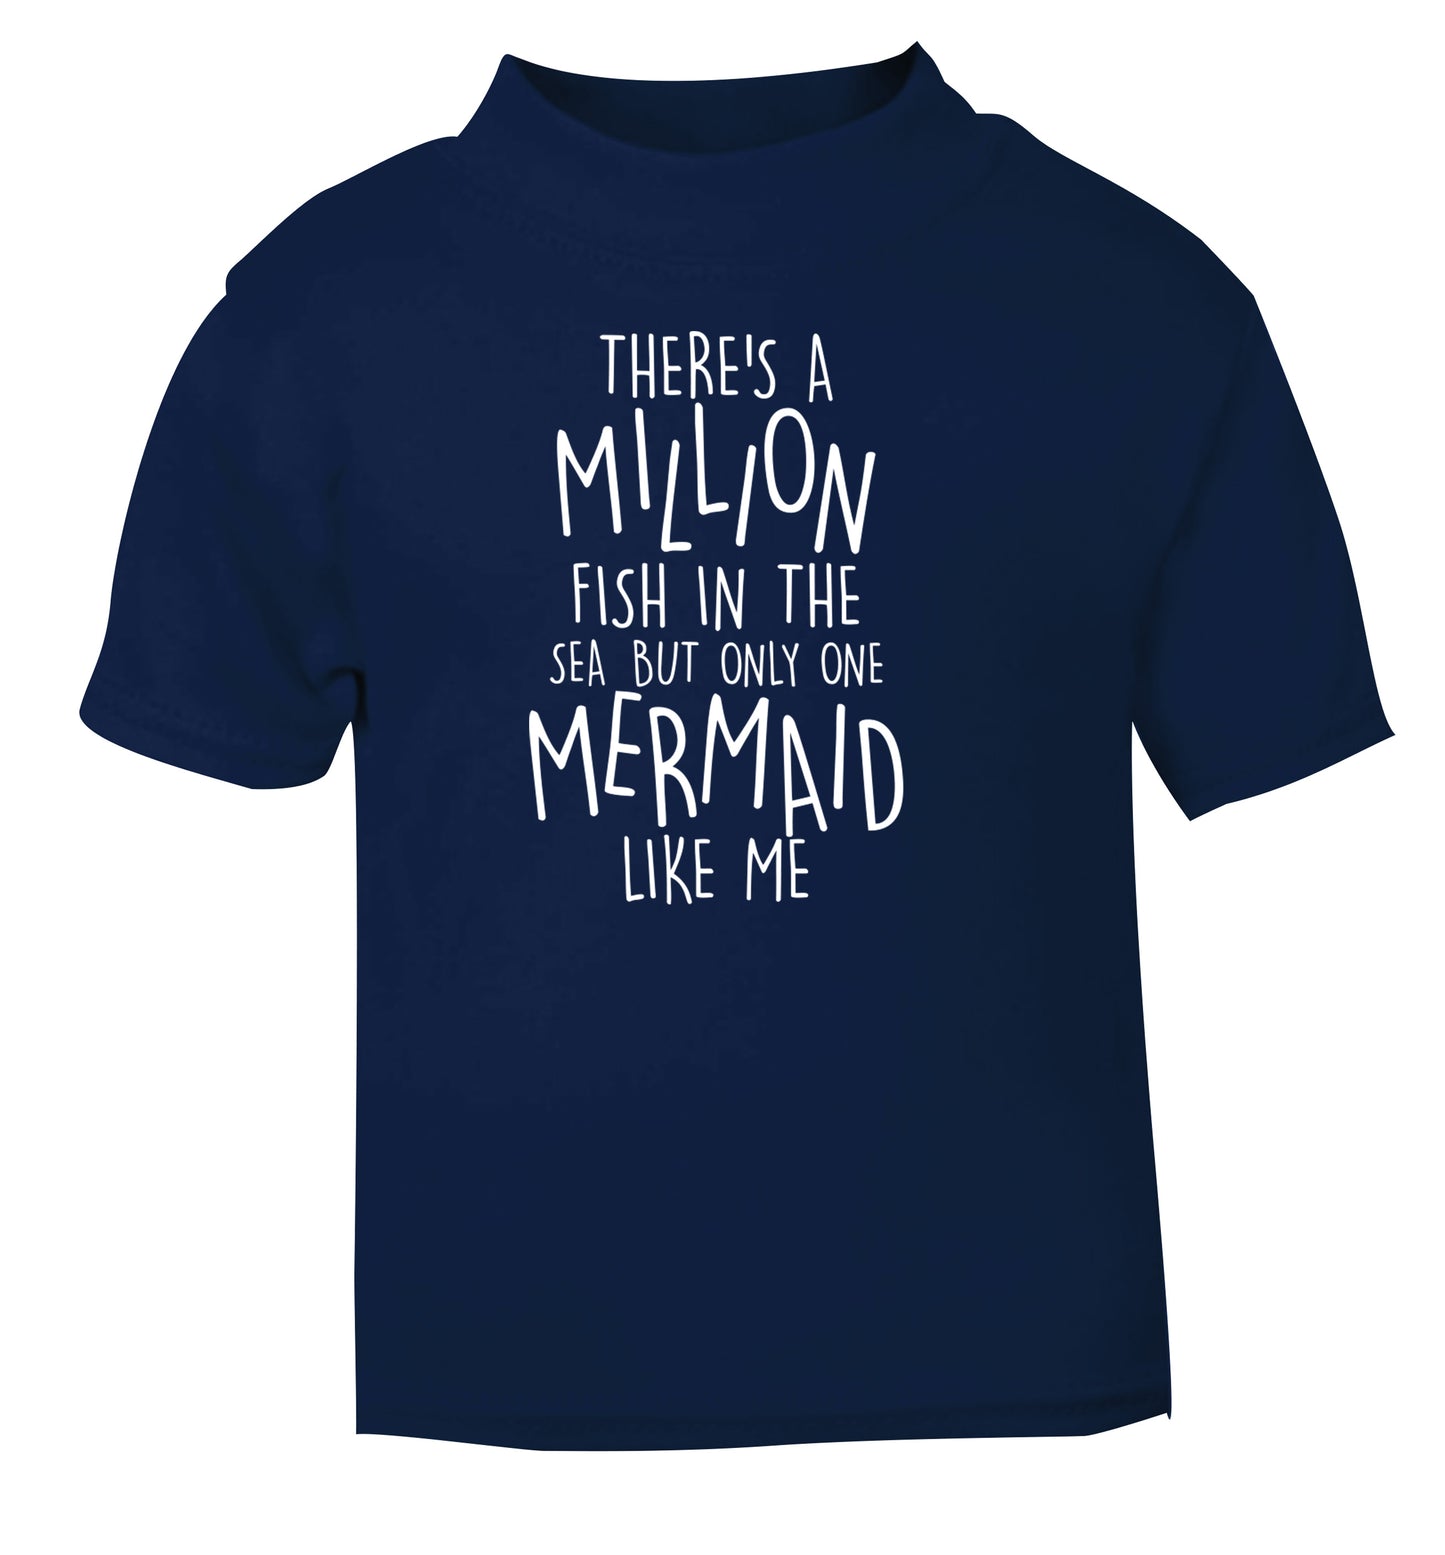 There's a million fish in the sea but only one mermaid like me navy Baby Toddler Tshirt 2 Years